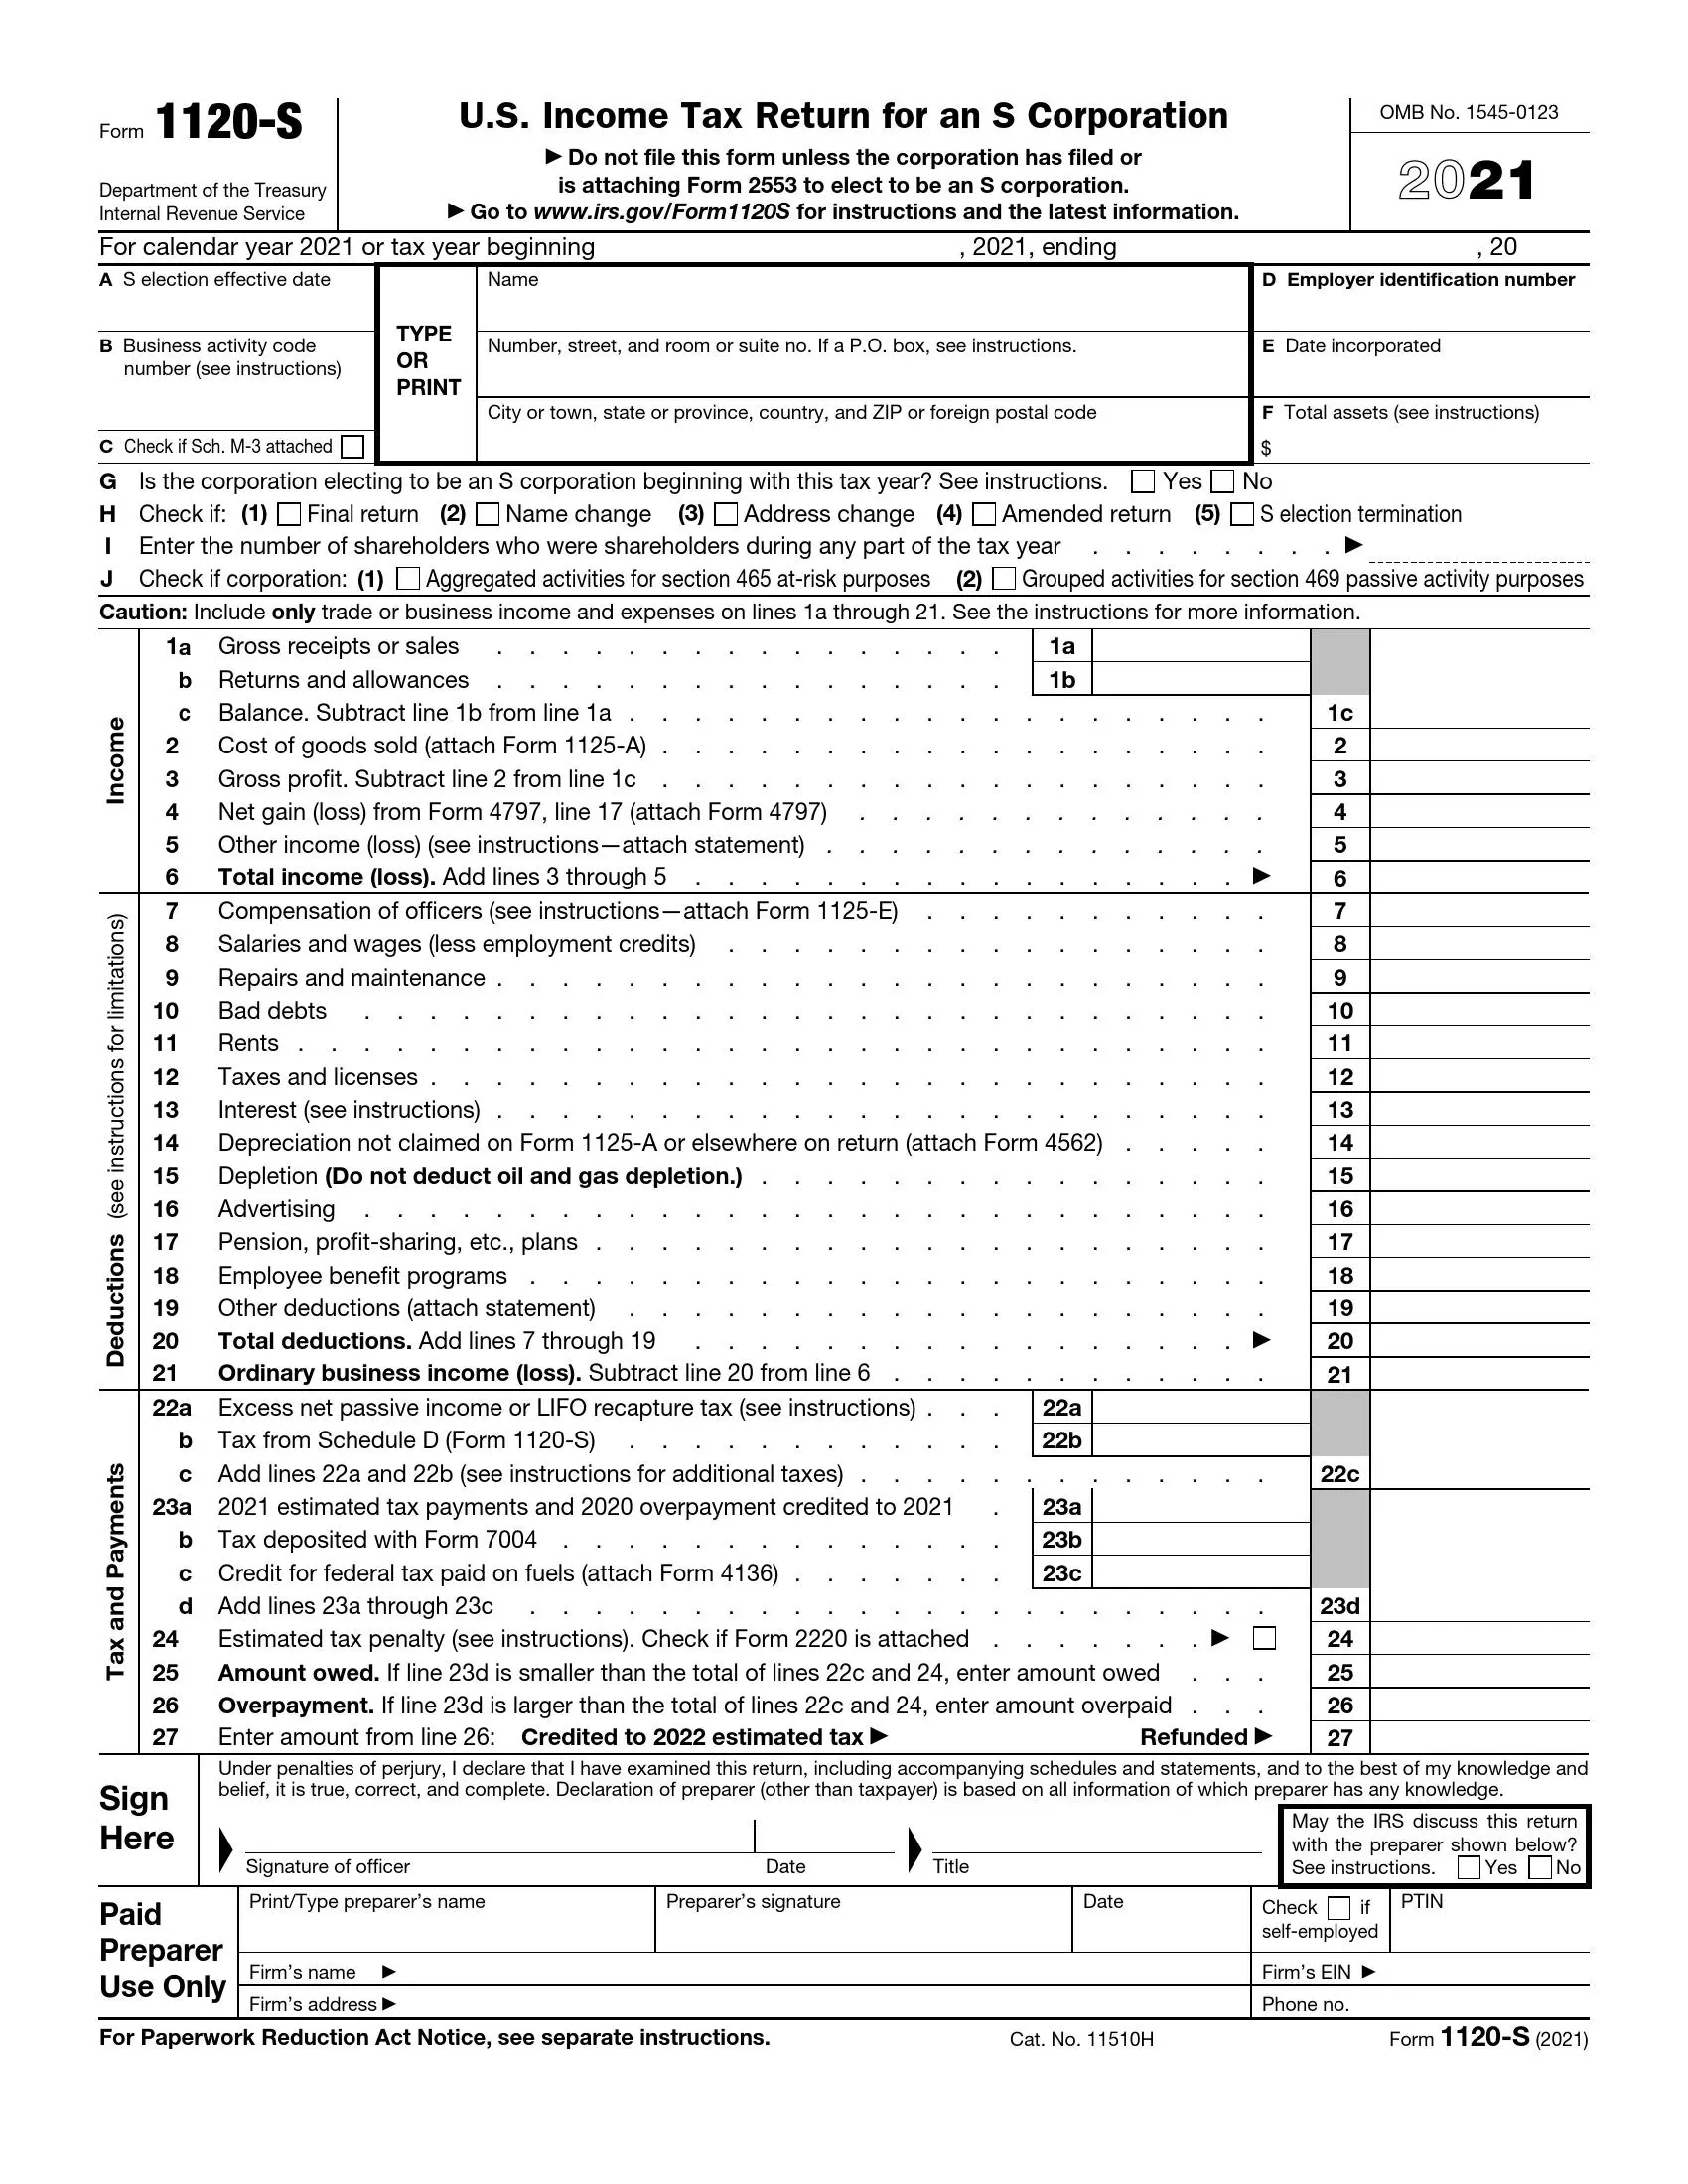 irs form 1120-s 2021 preview